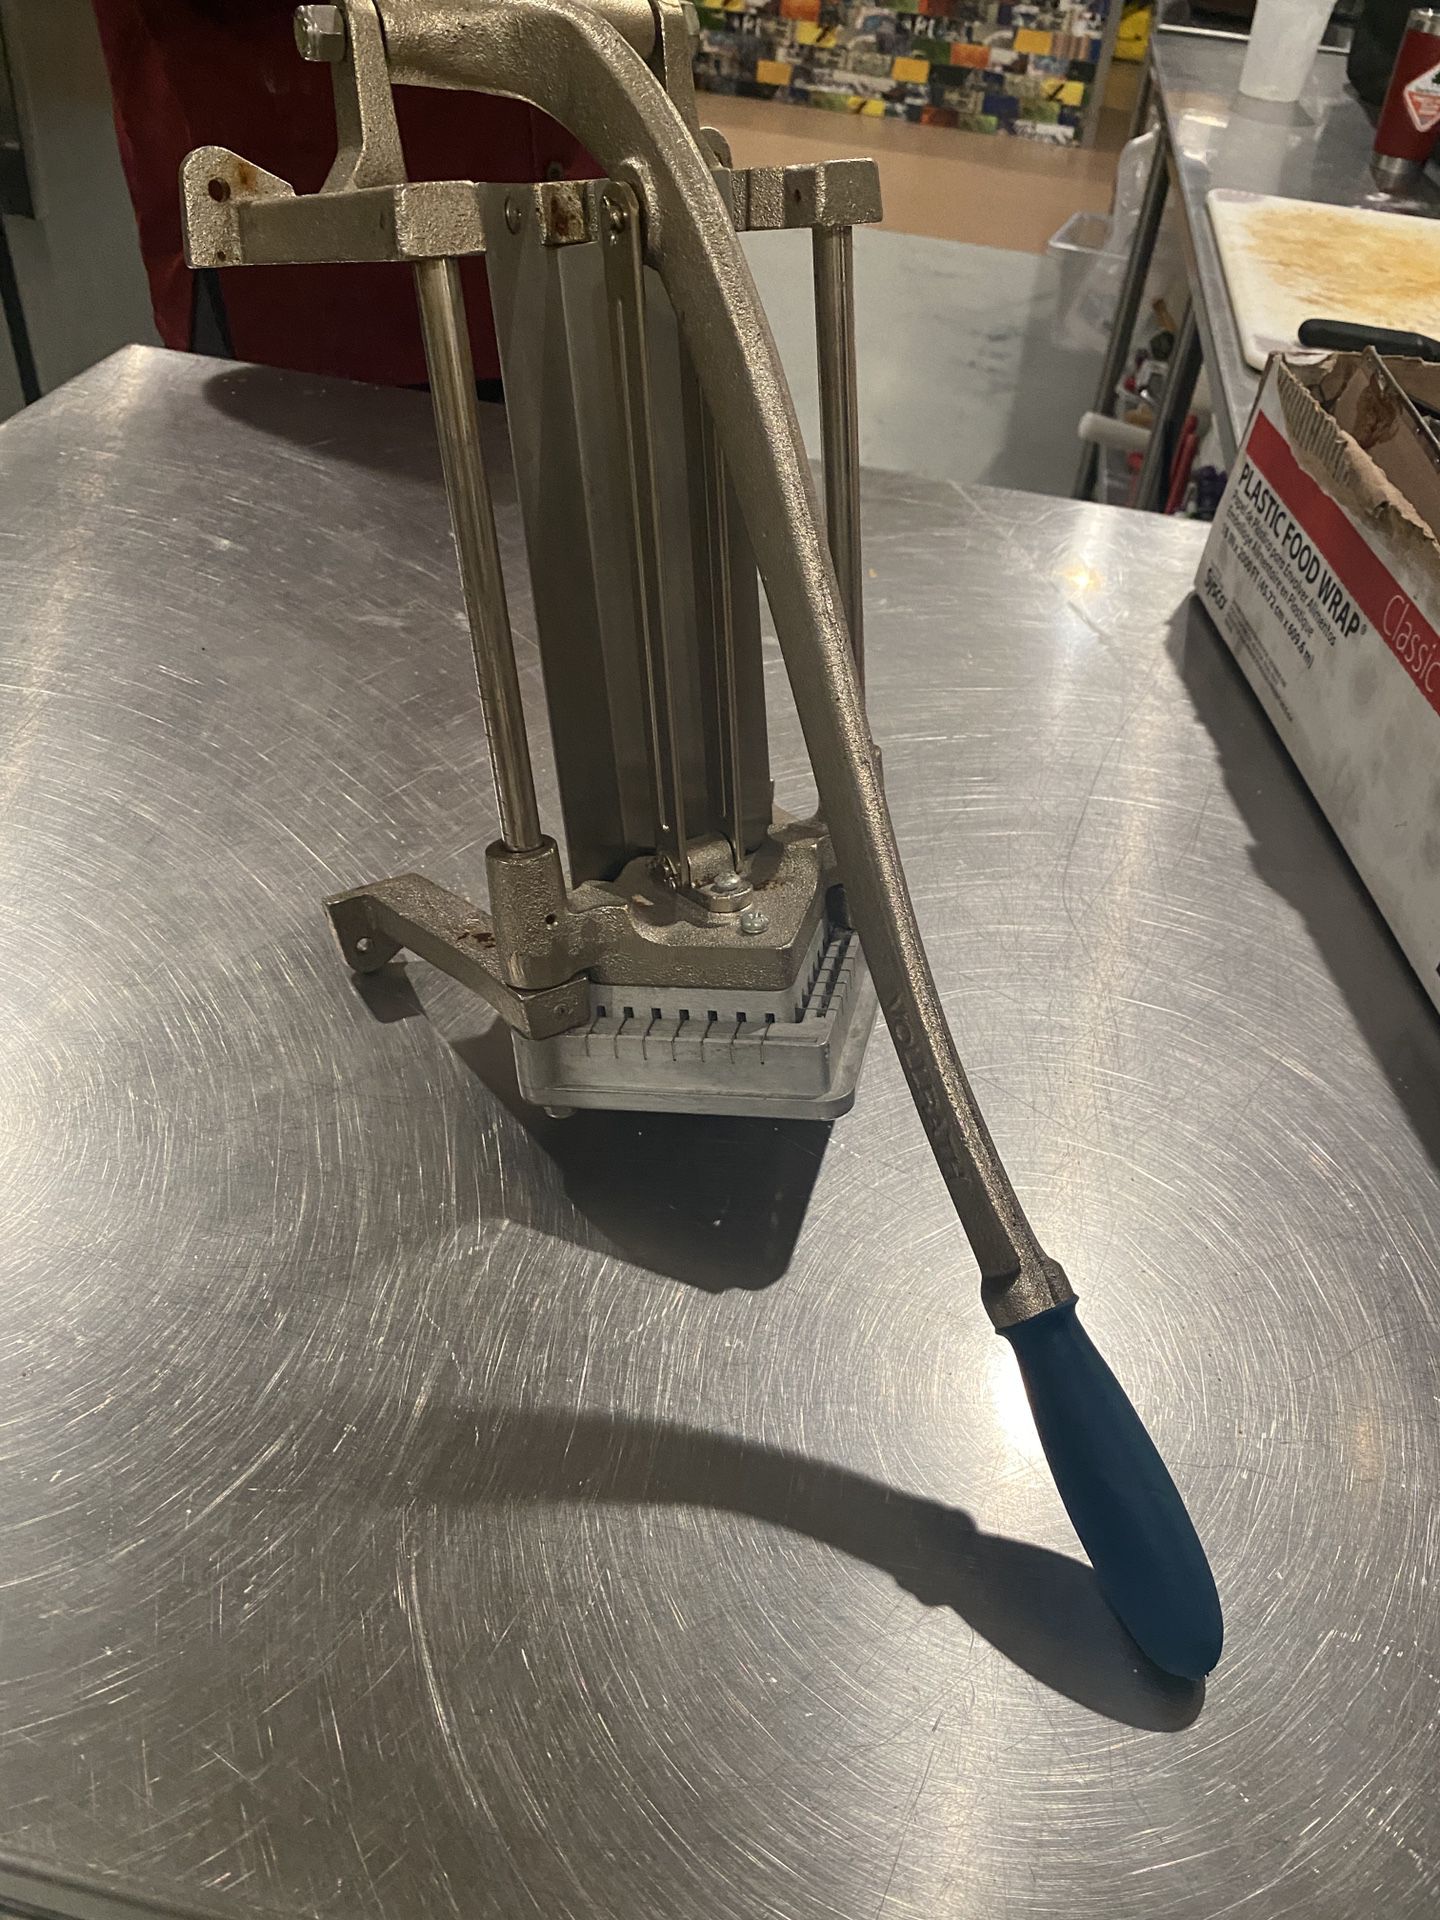 Potato Cutter To Make French Fries